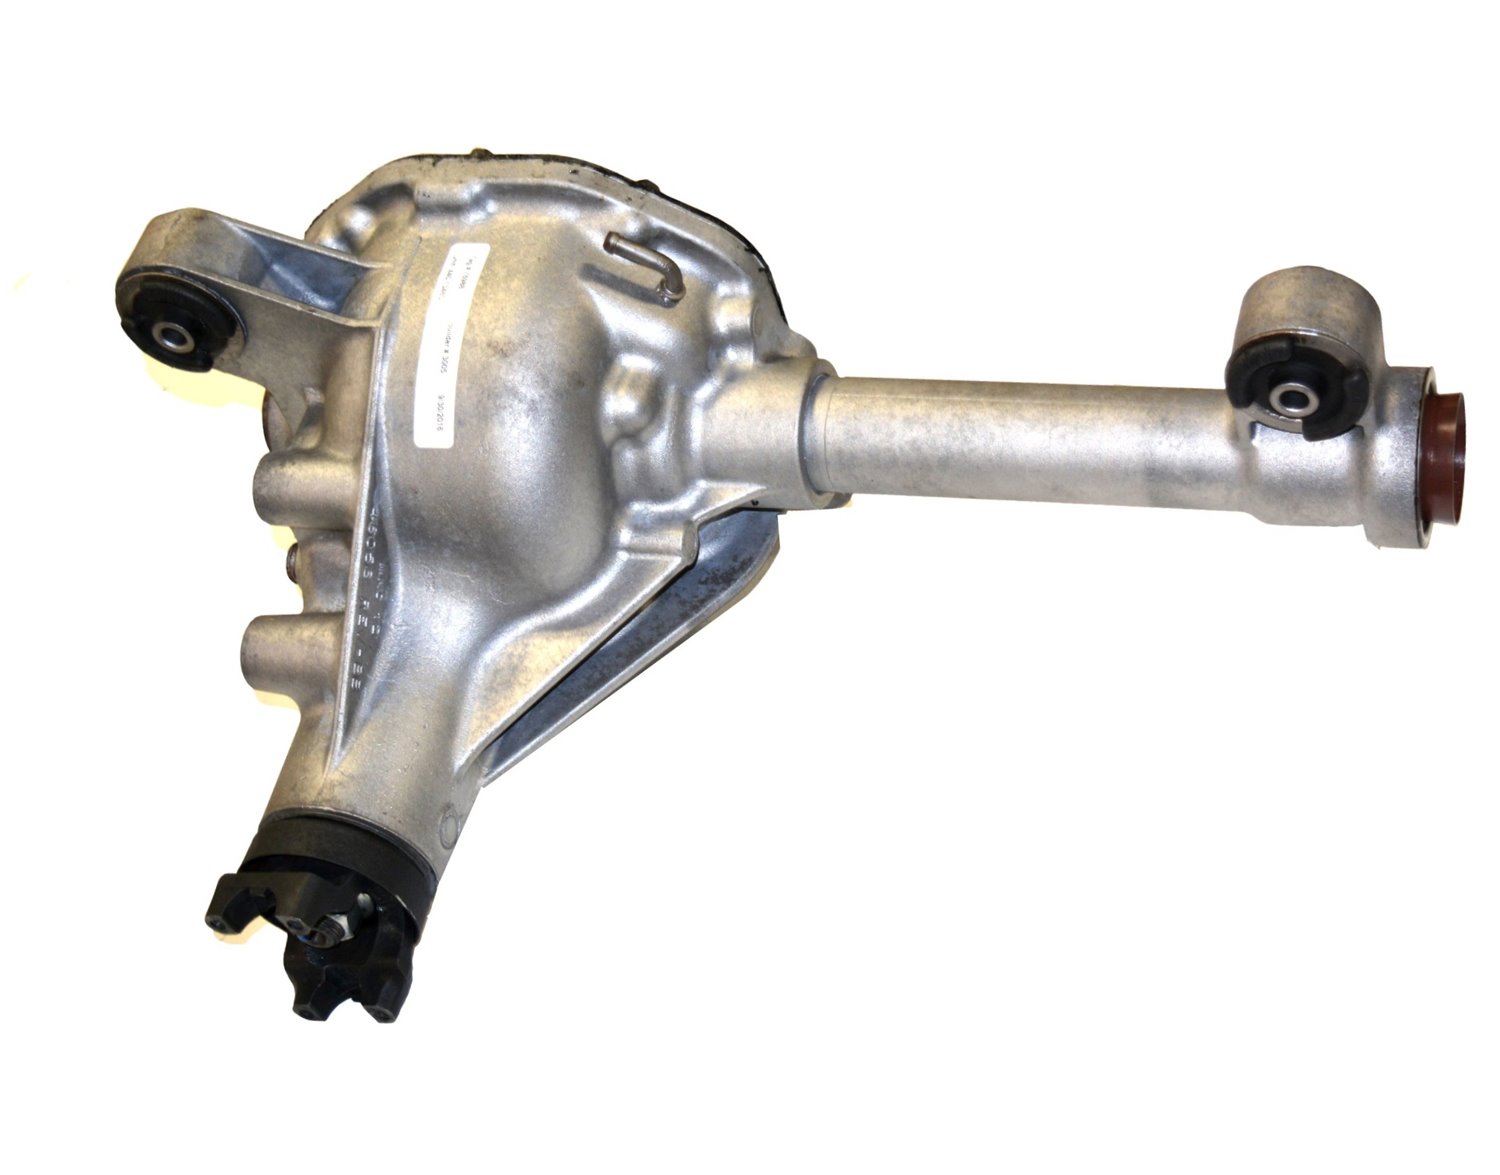 Remanufactured Axle Assembly for Ford M35 IFS 91-94